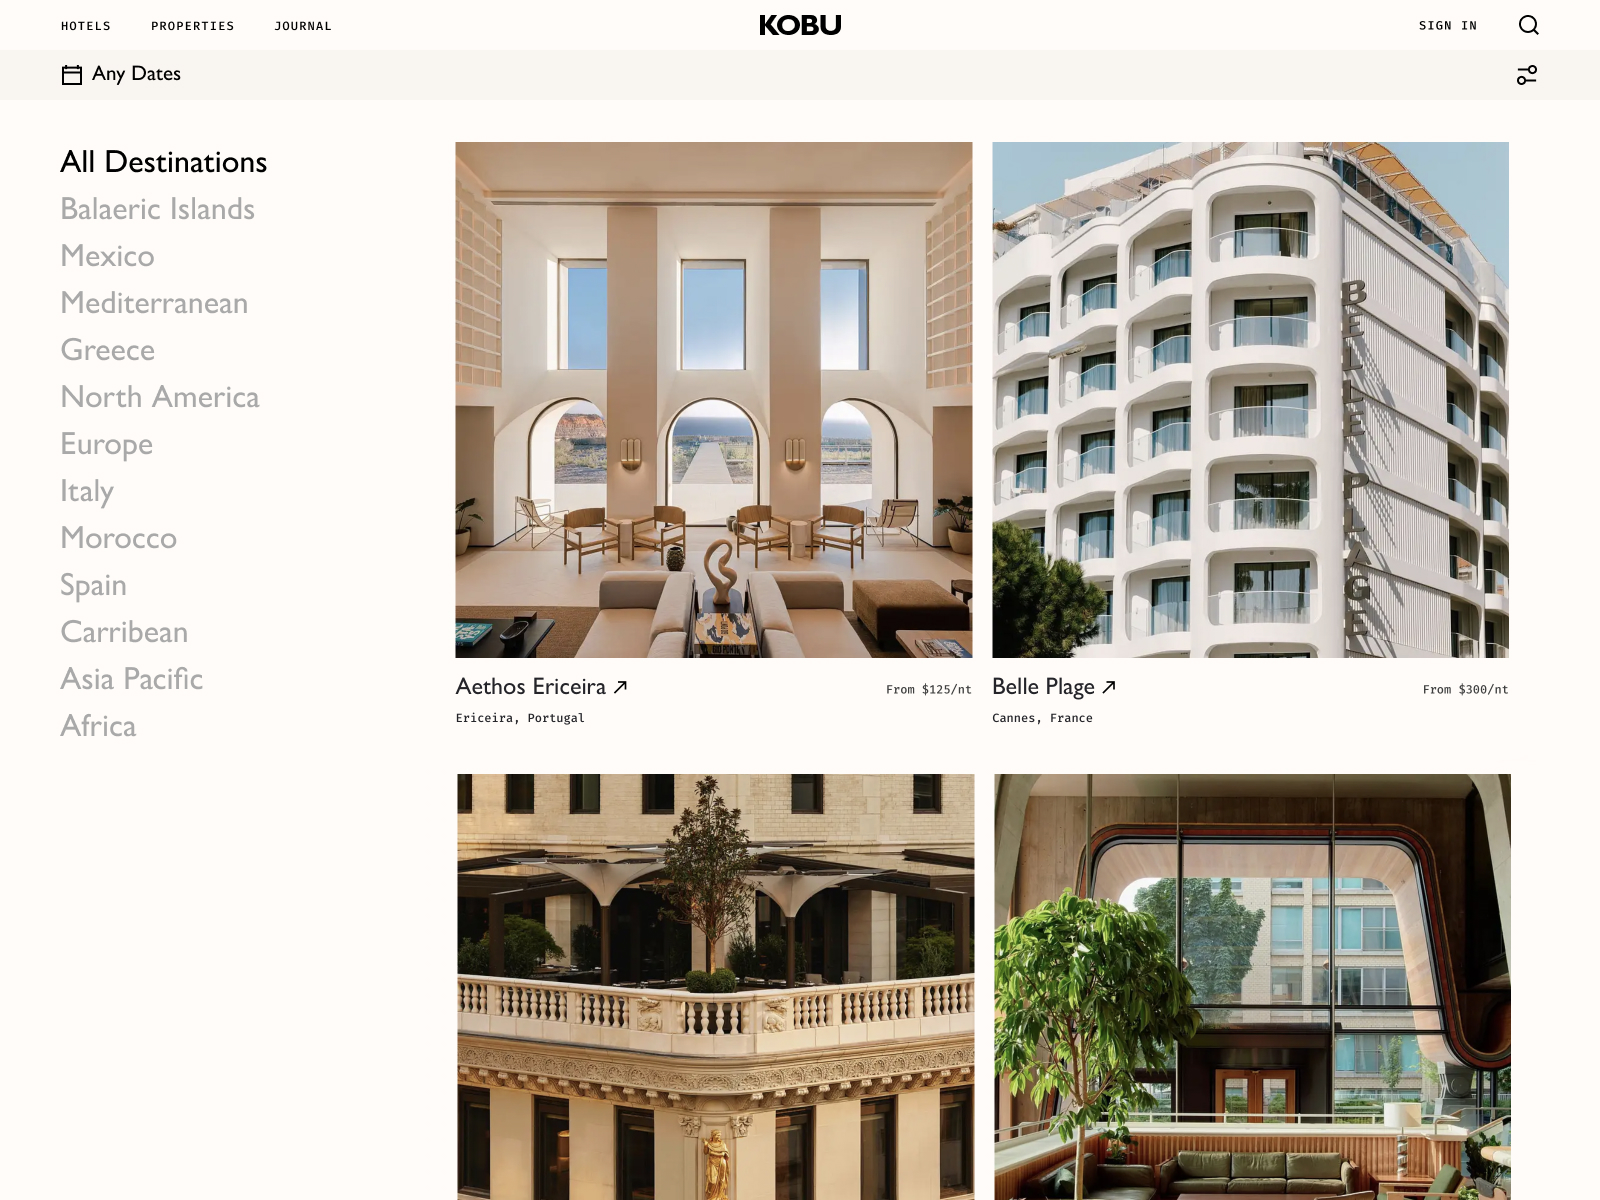 Hotels Landing Page